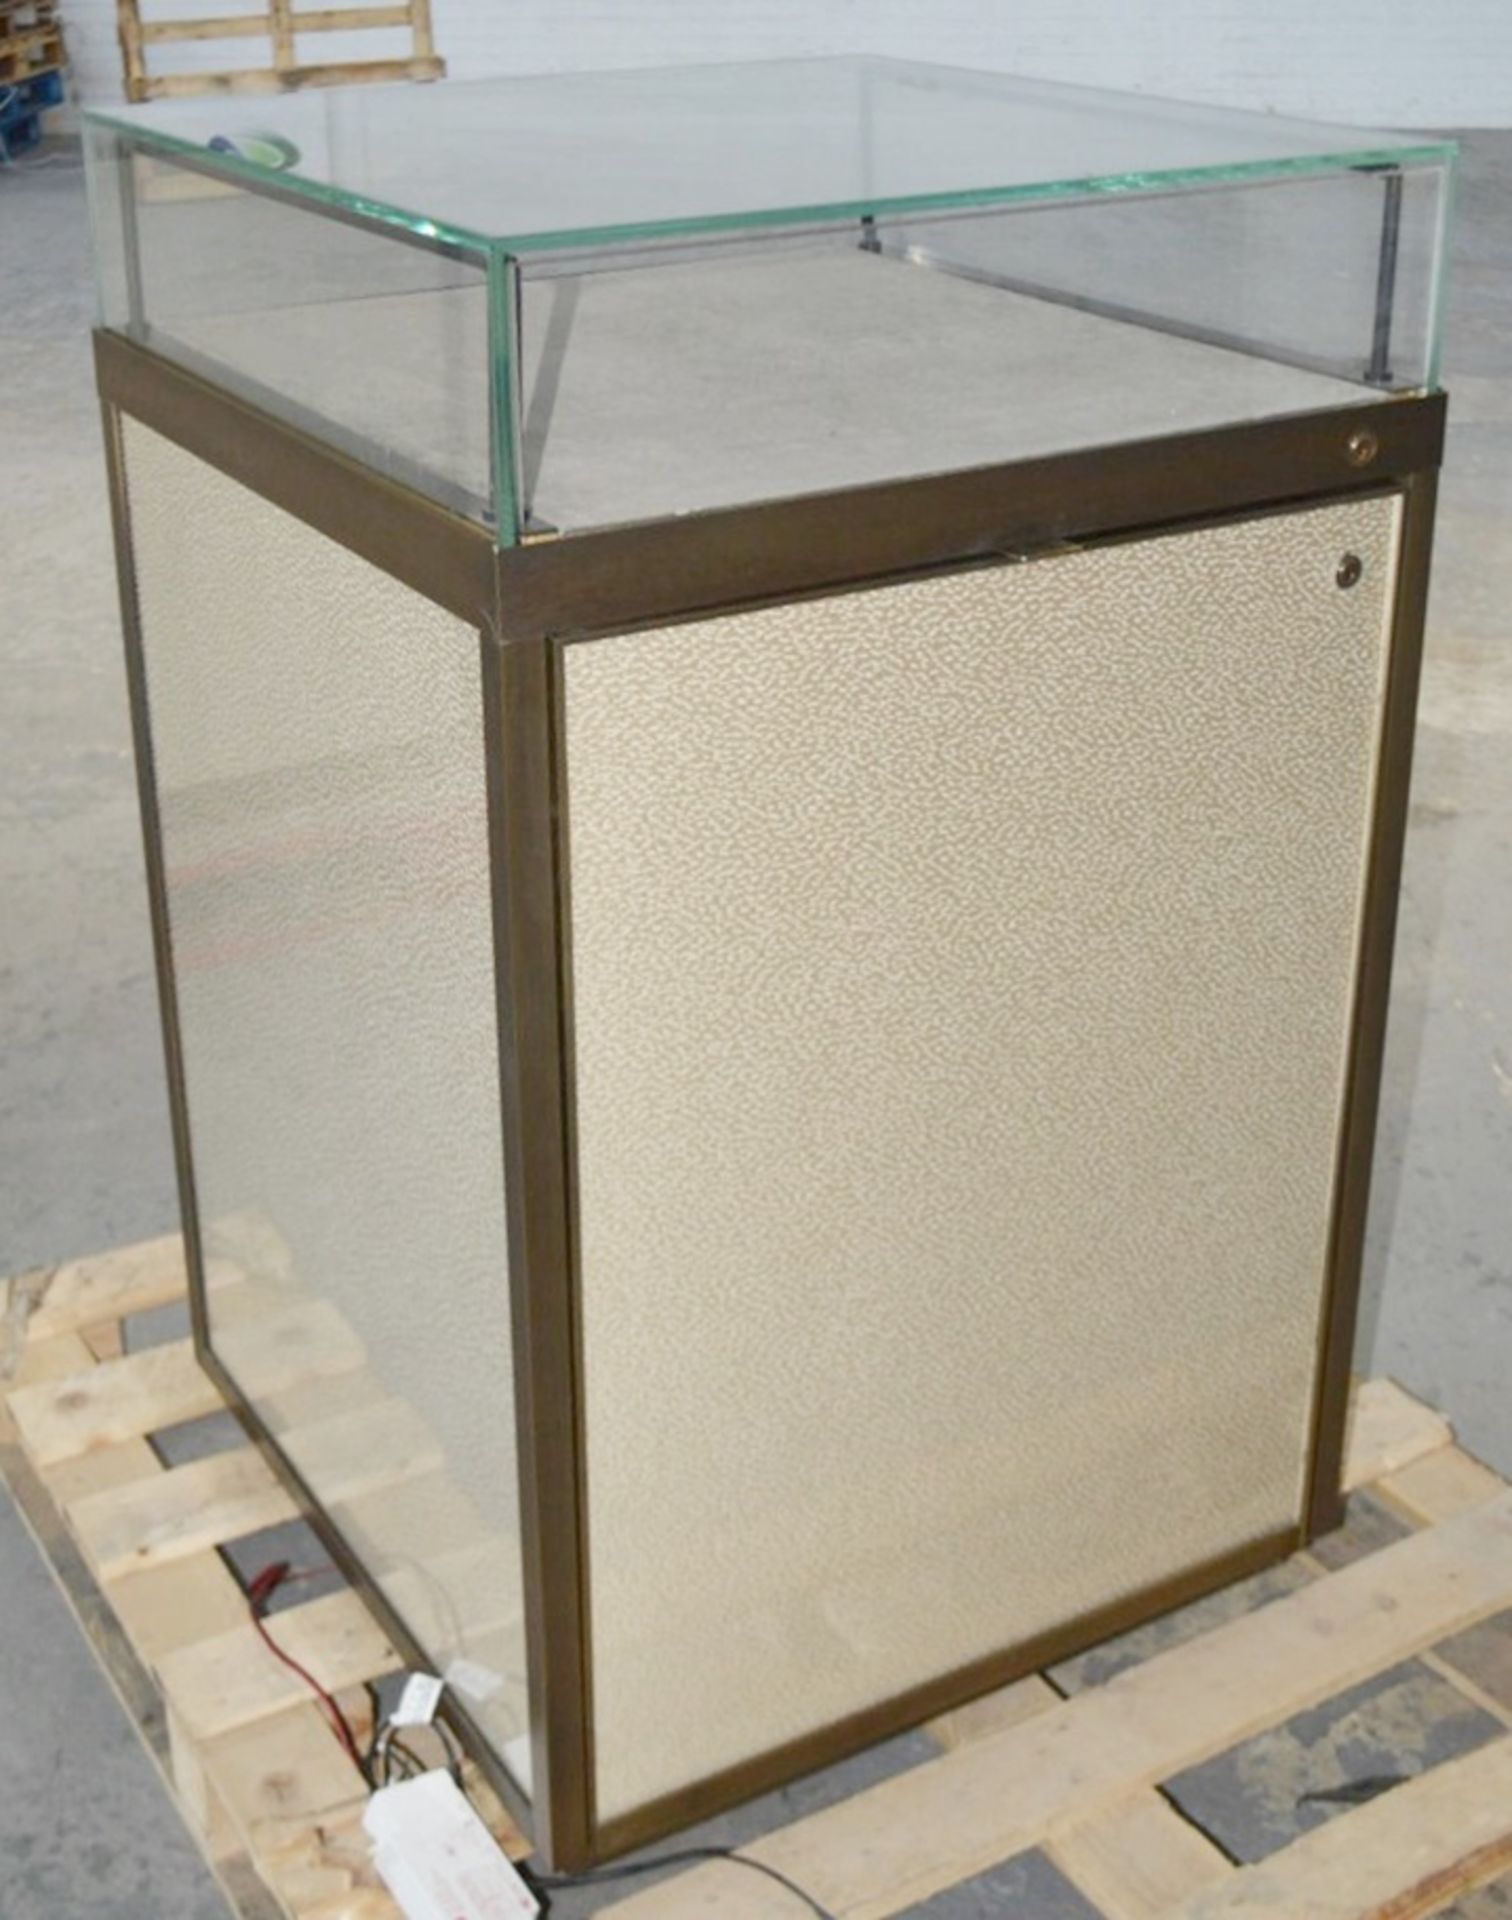 1 x Illuminated Glass Display Case For Luxury Items - Dimensions: H105 x W64 x D64cm - Ex-Showroom - Image 2 of 5